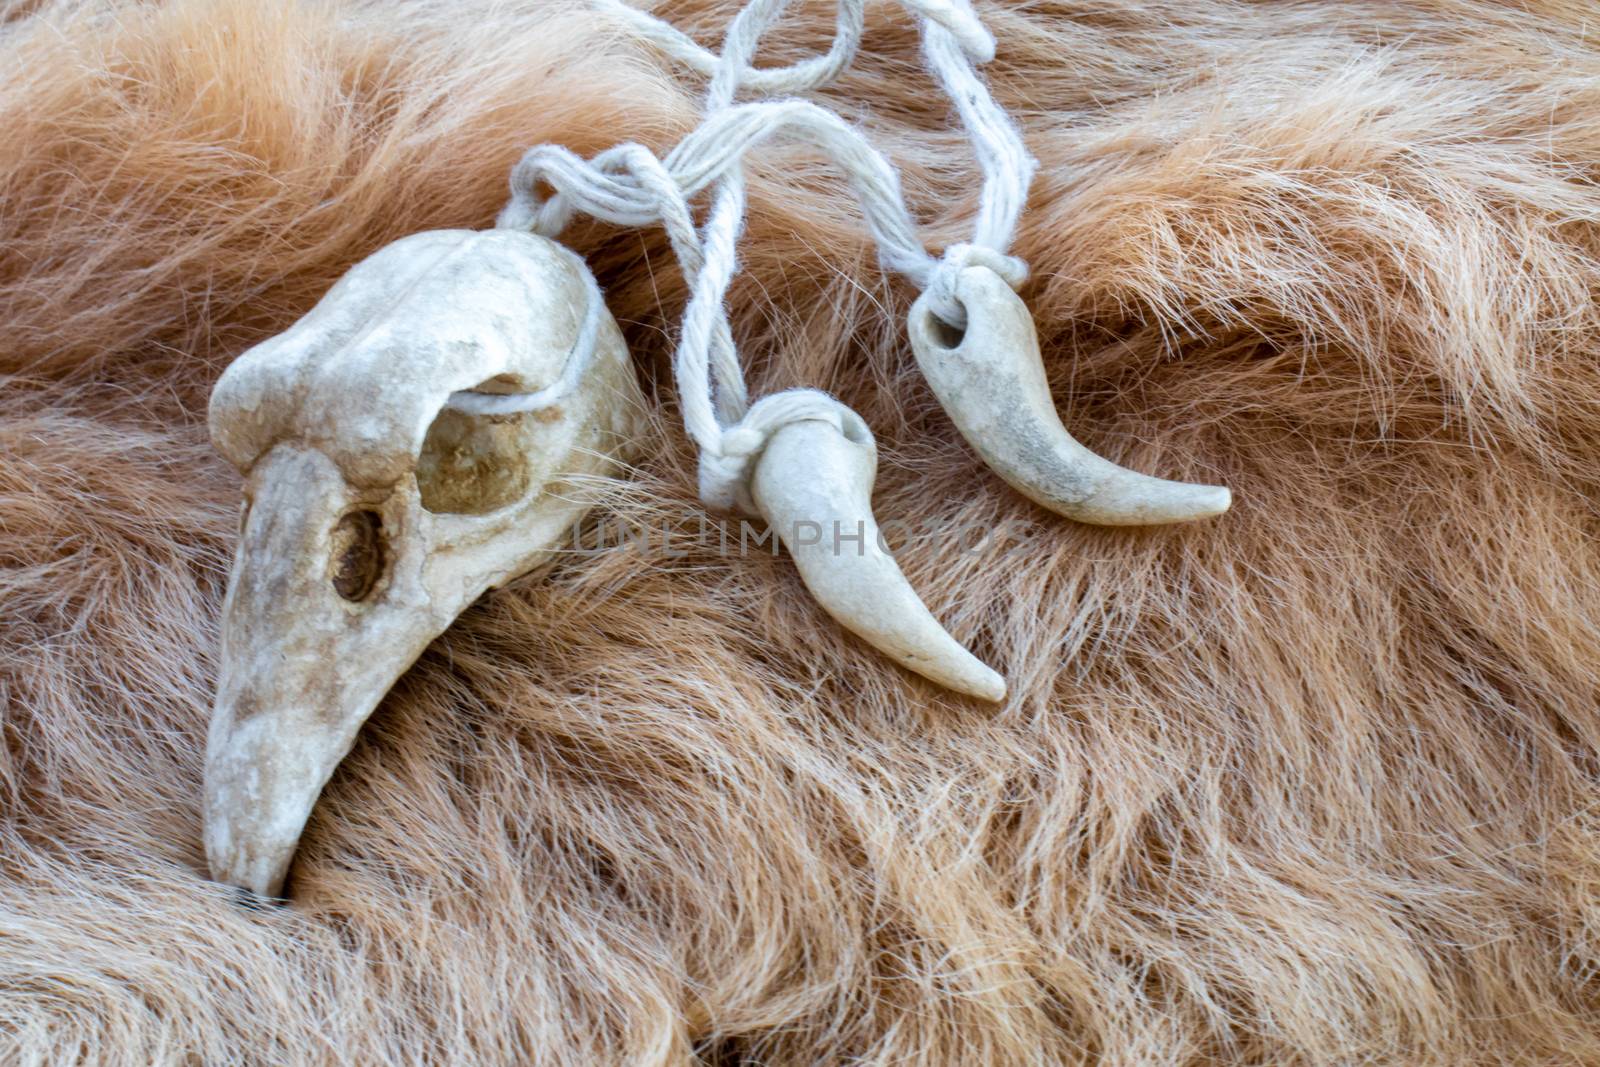 Bird skull on a animal fur. Necklace for rituals of a druid or magician. by Andreajk3